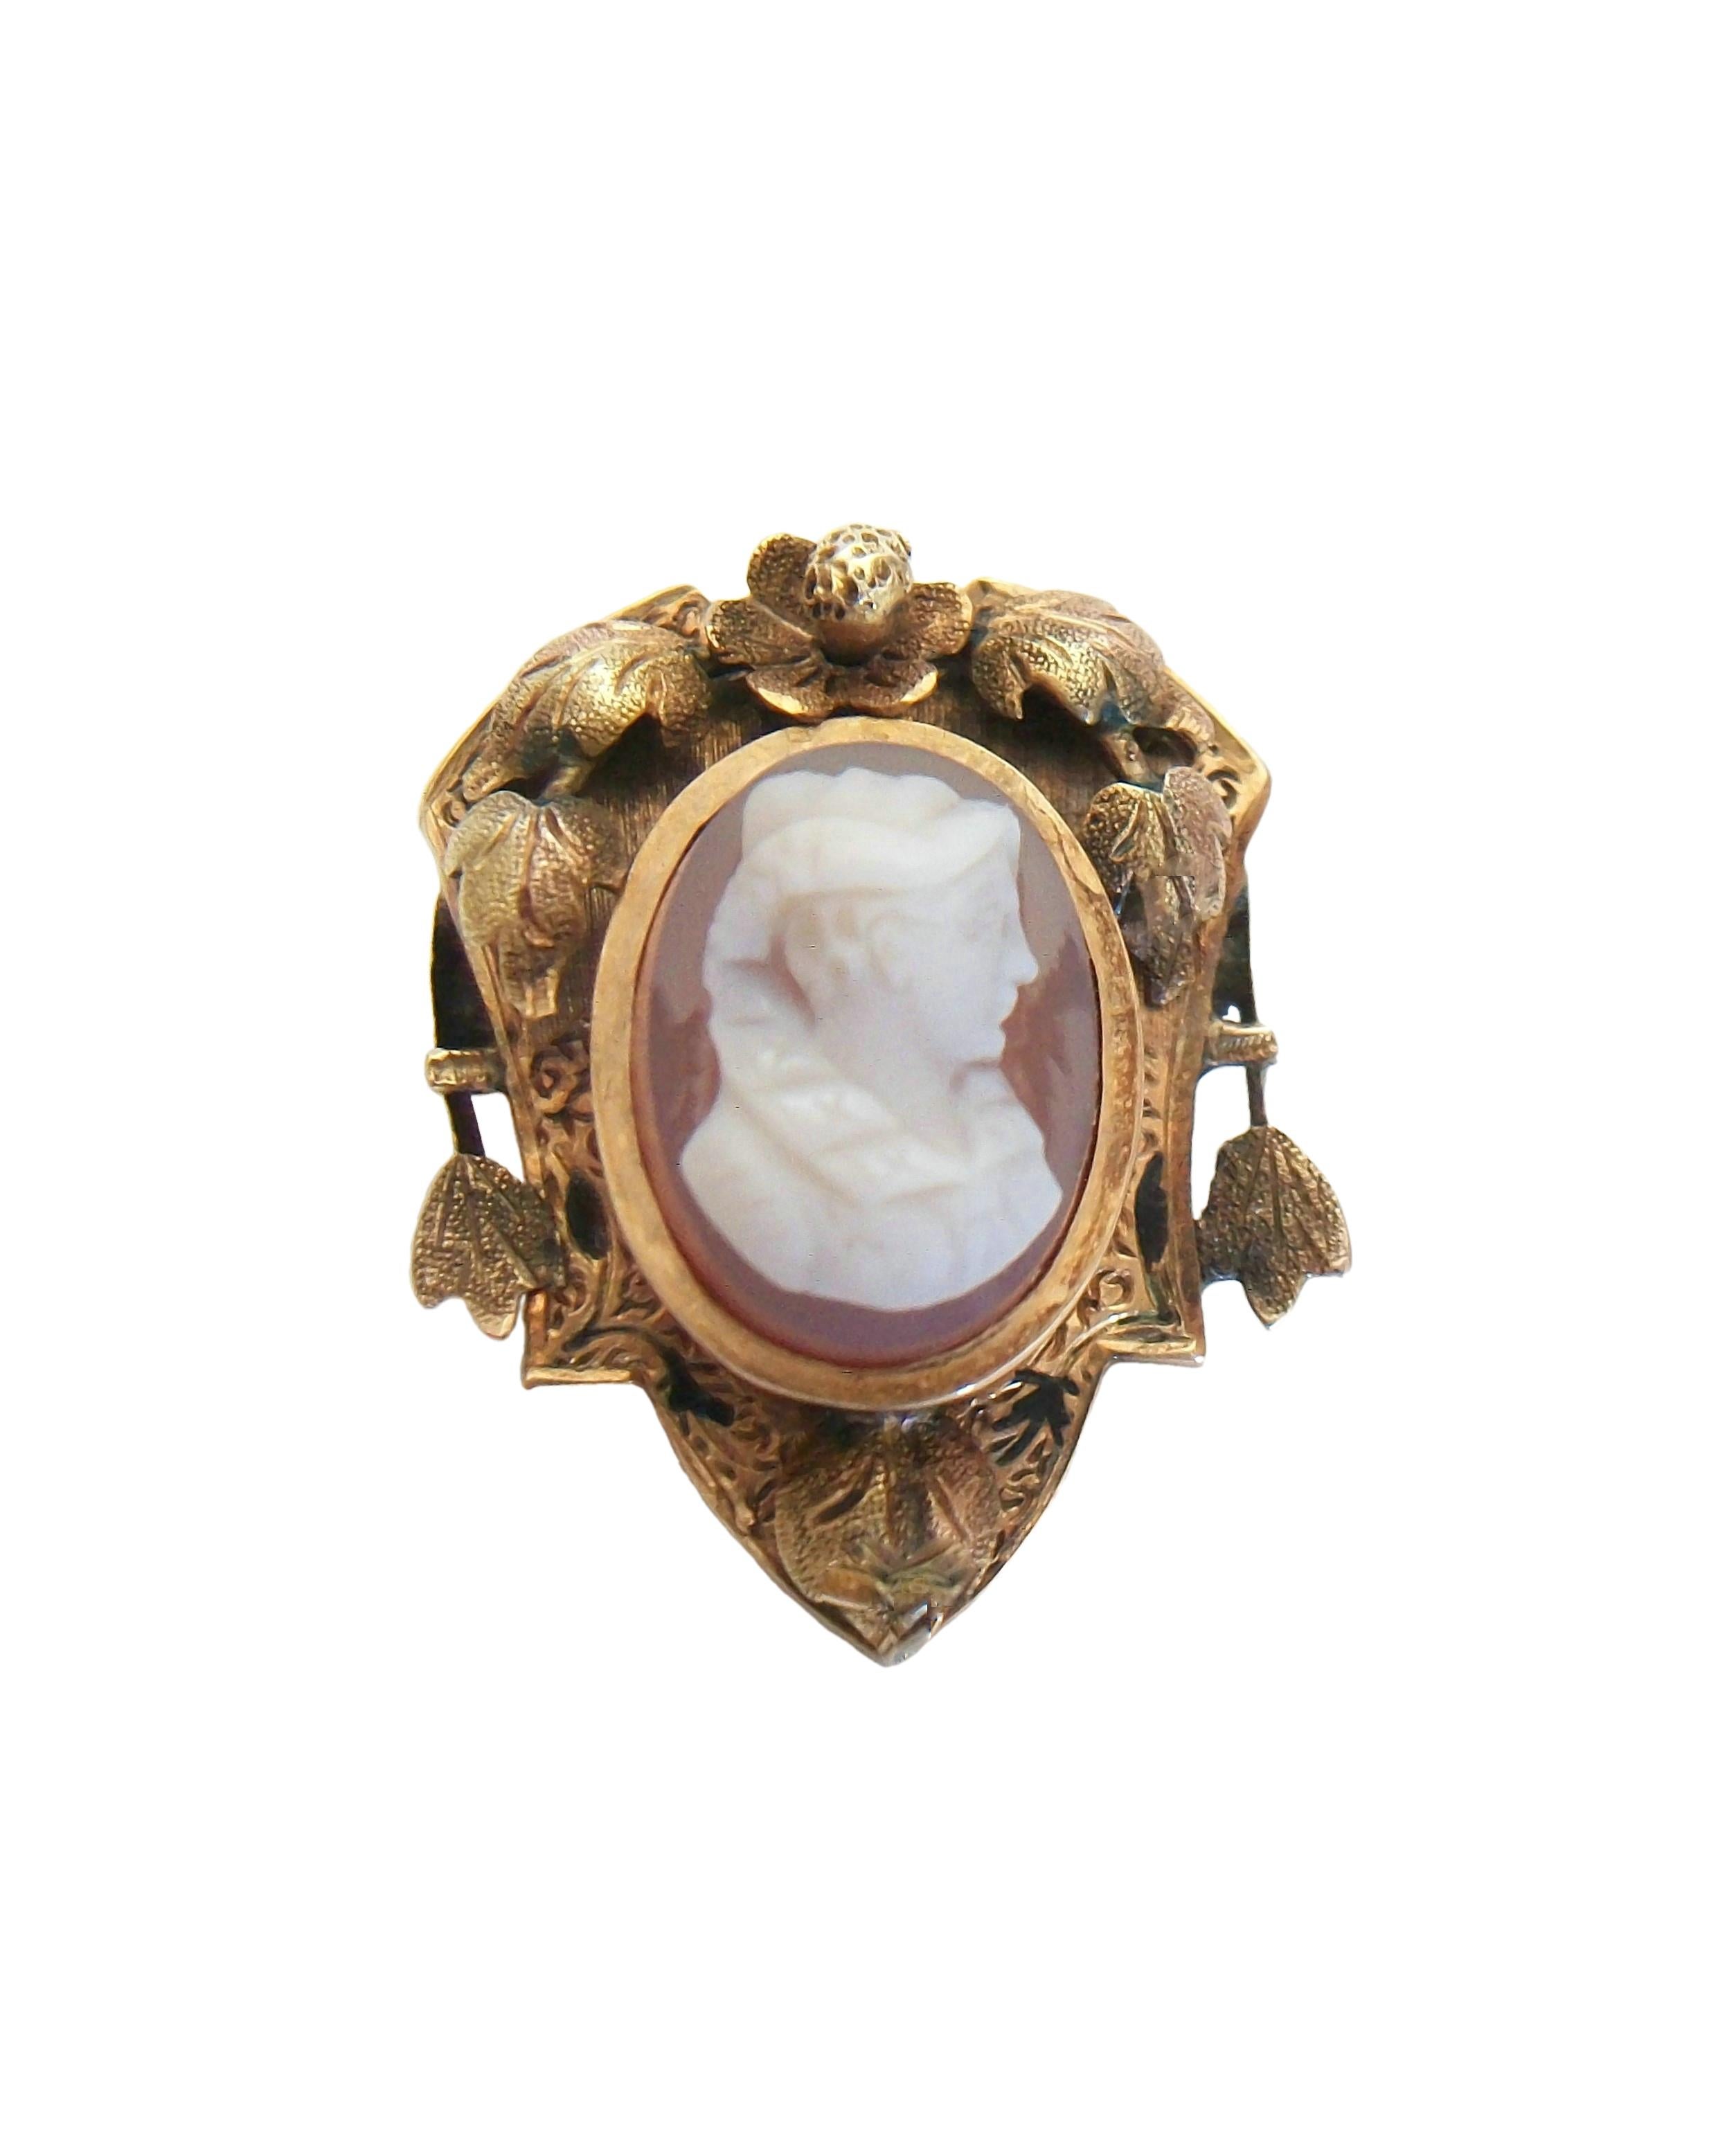 Antique Victorian Sardonyx hardstone (Chalcedony Quartz) cameo brooch / pin - the cameo hand carved with fine detail and set in an elaborate tooled 10K yellow gold frame - featuring a profile of a woman (possibly Queen Victoria) - the gold frame